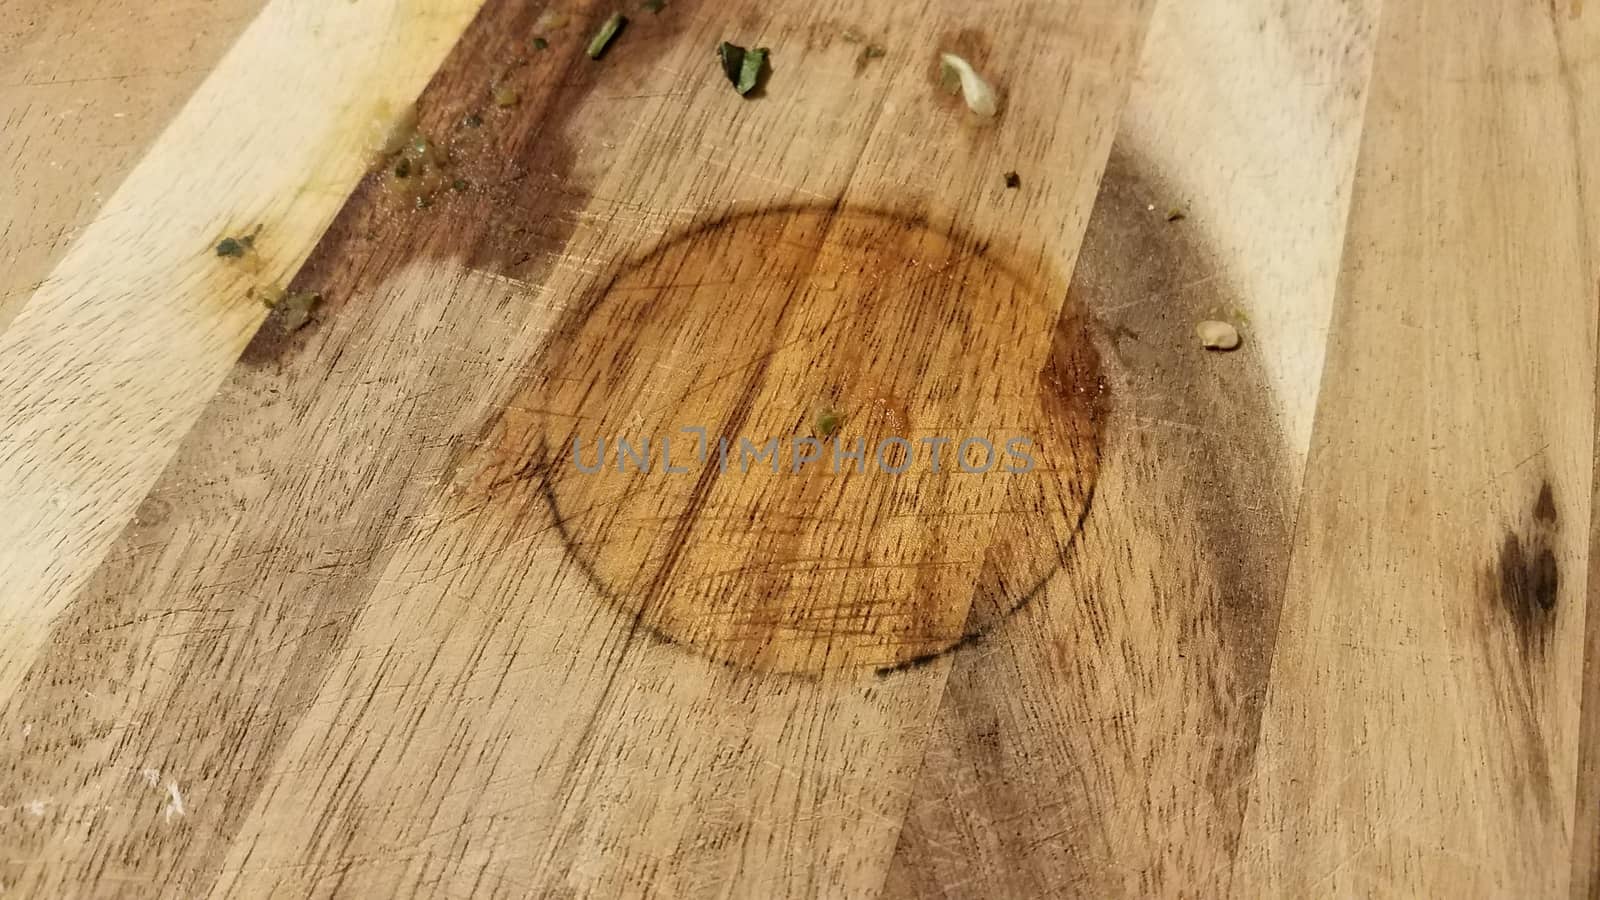 dirty wooden cutting board with bits of food and circular stain by stockphotofan1